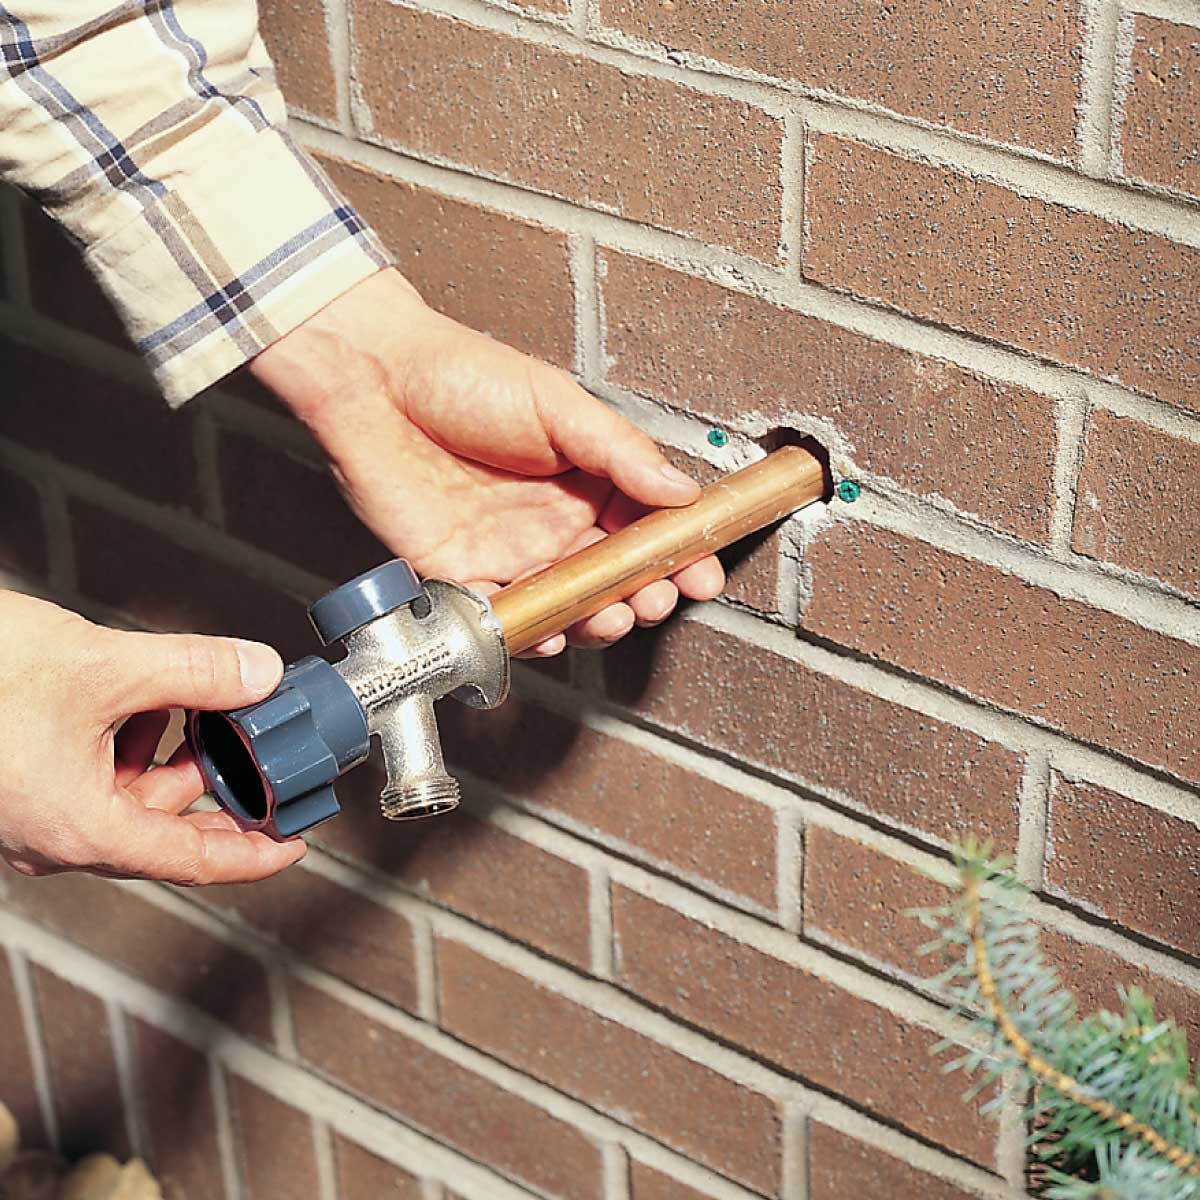 How to Install a Frost-Proof Faucet Outdoors (DIY)